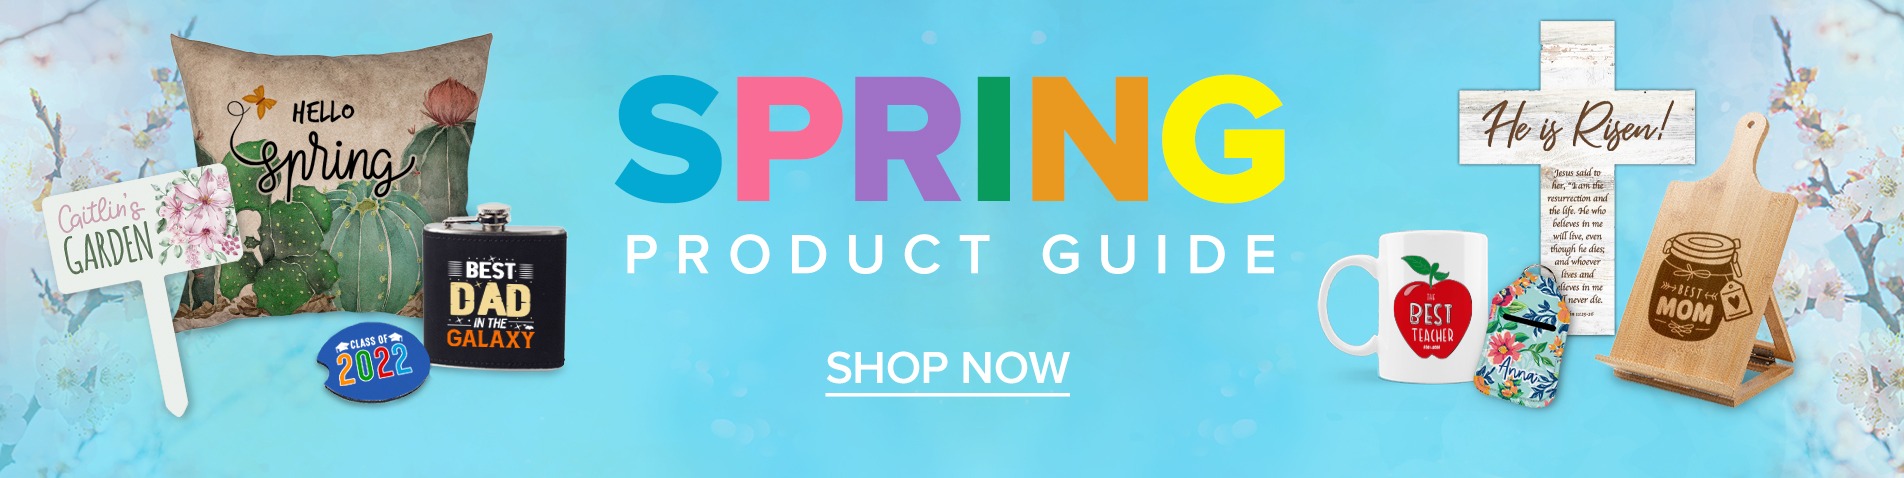 Spring Product Guide Shop Now